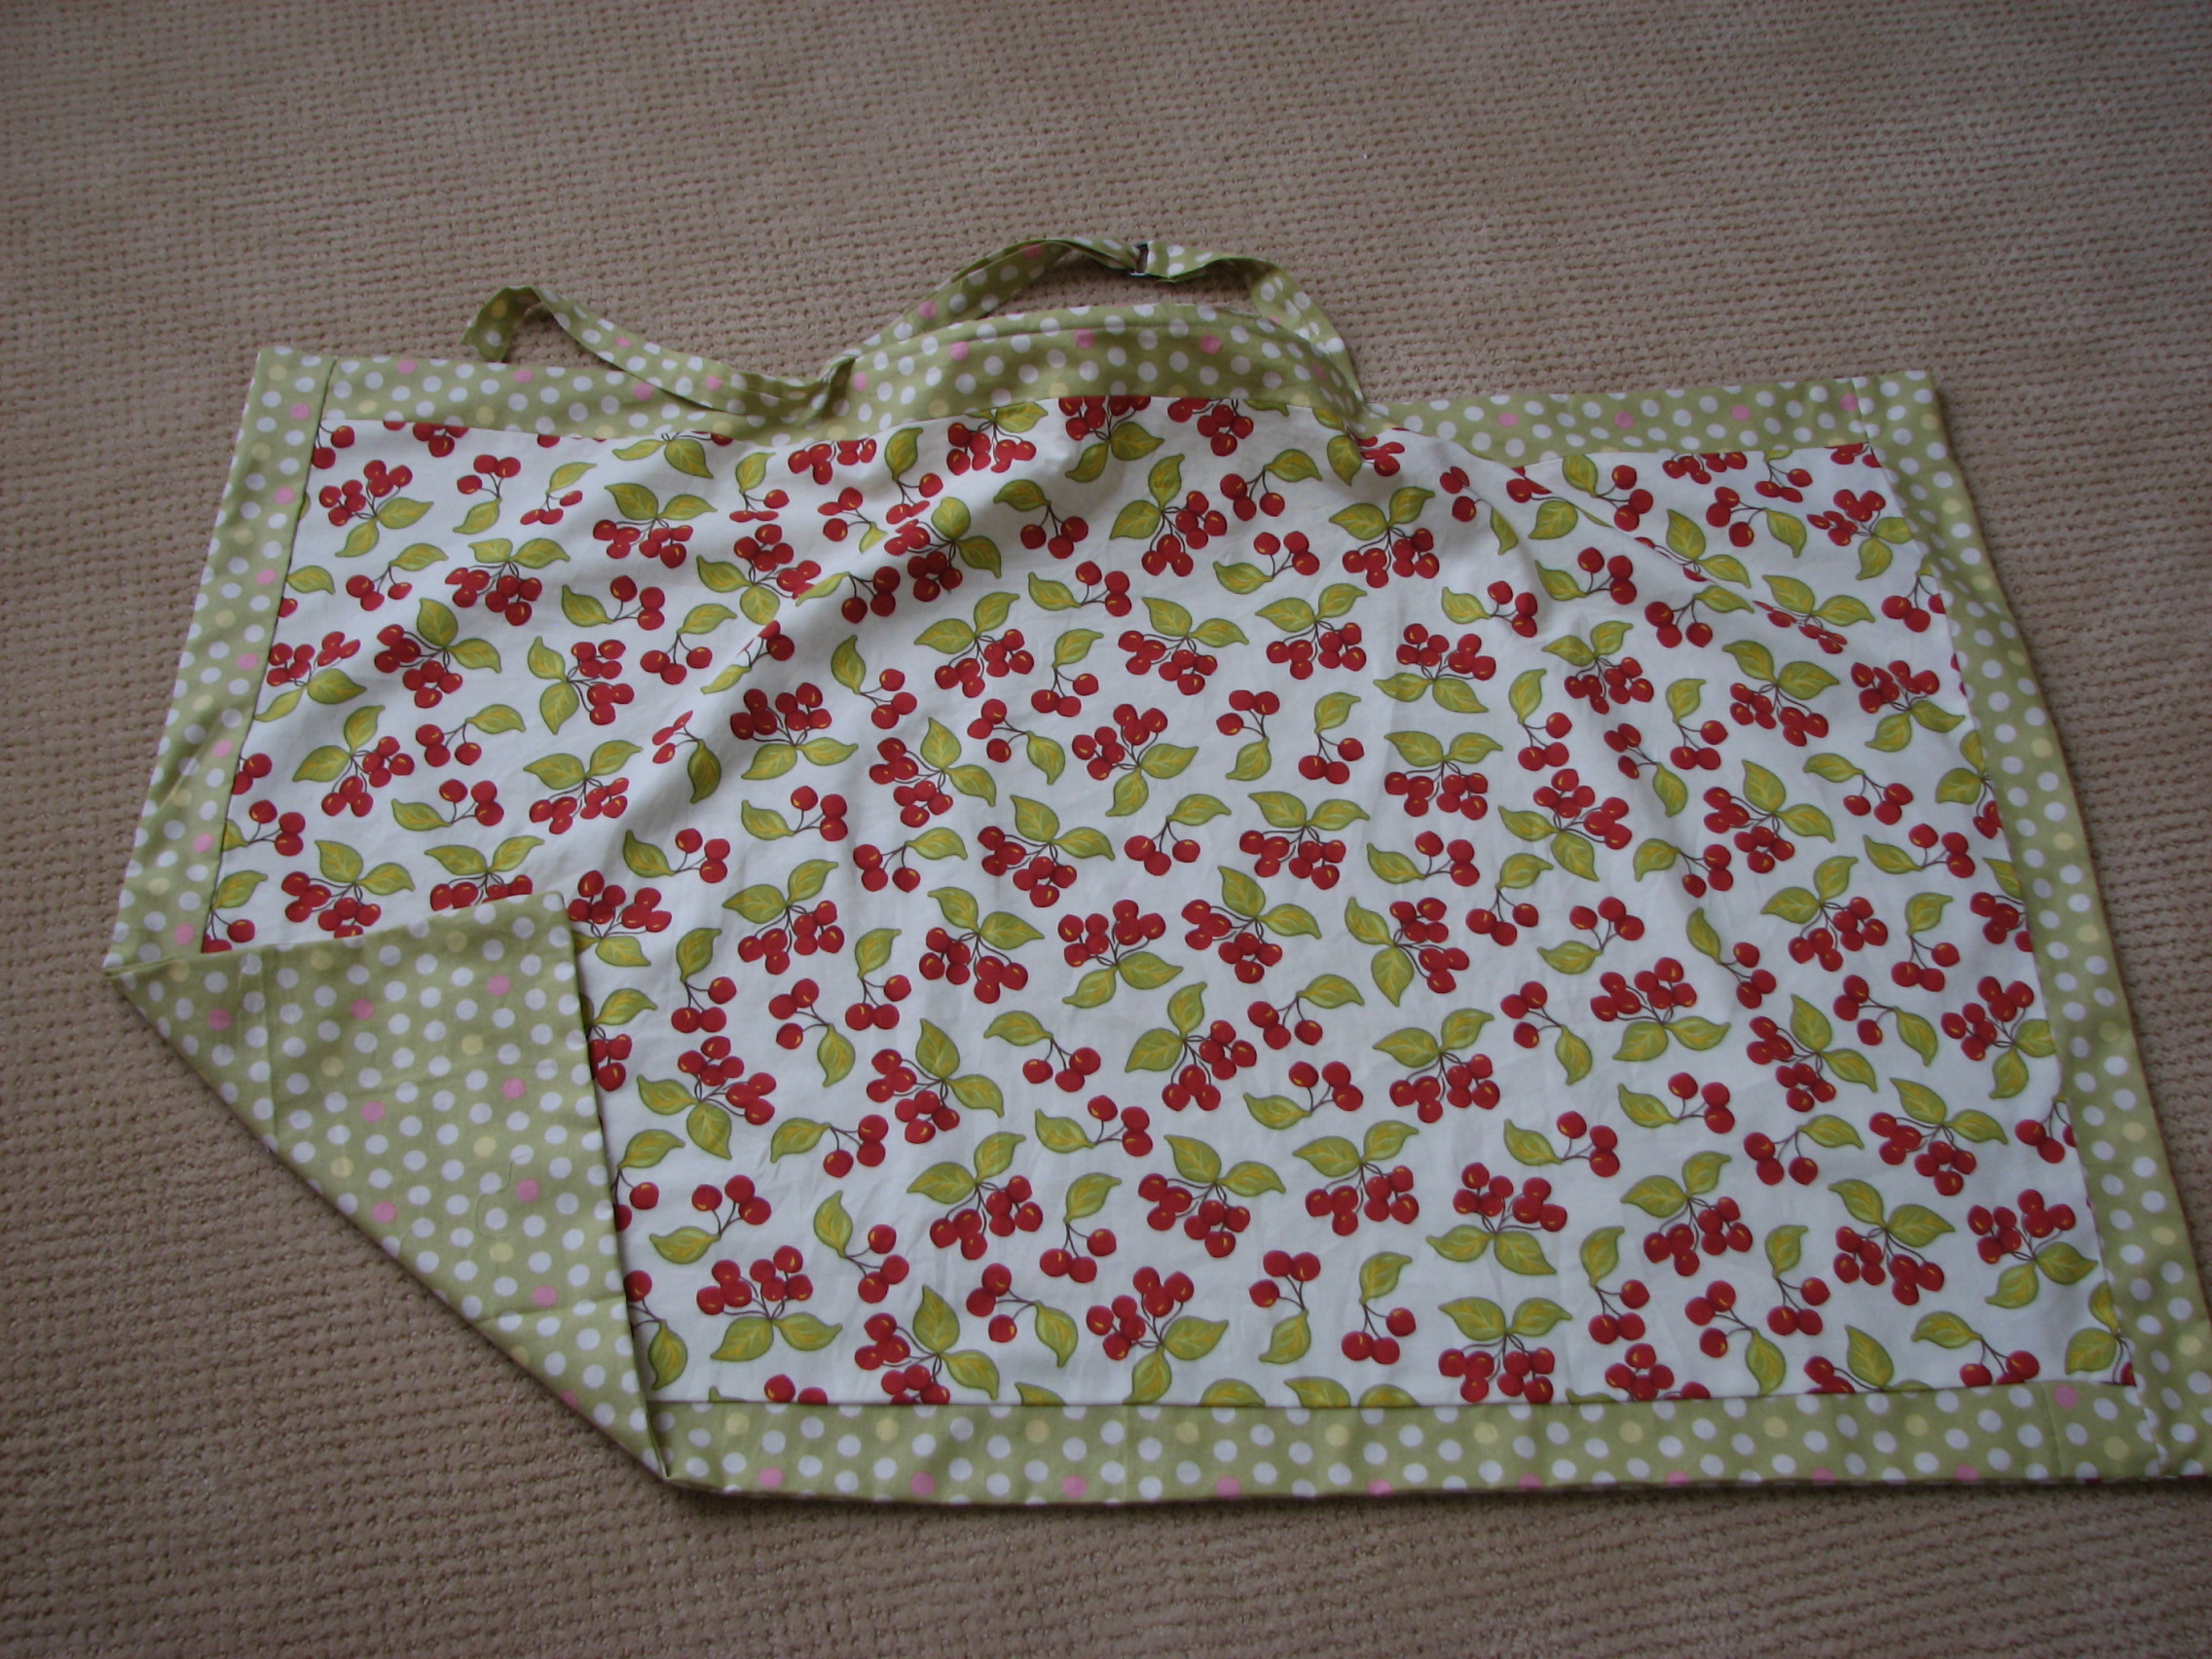 Reversible Nursing Cover - All Free Sewing - Free Sewing Patterns